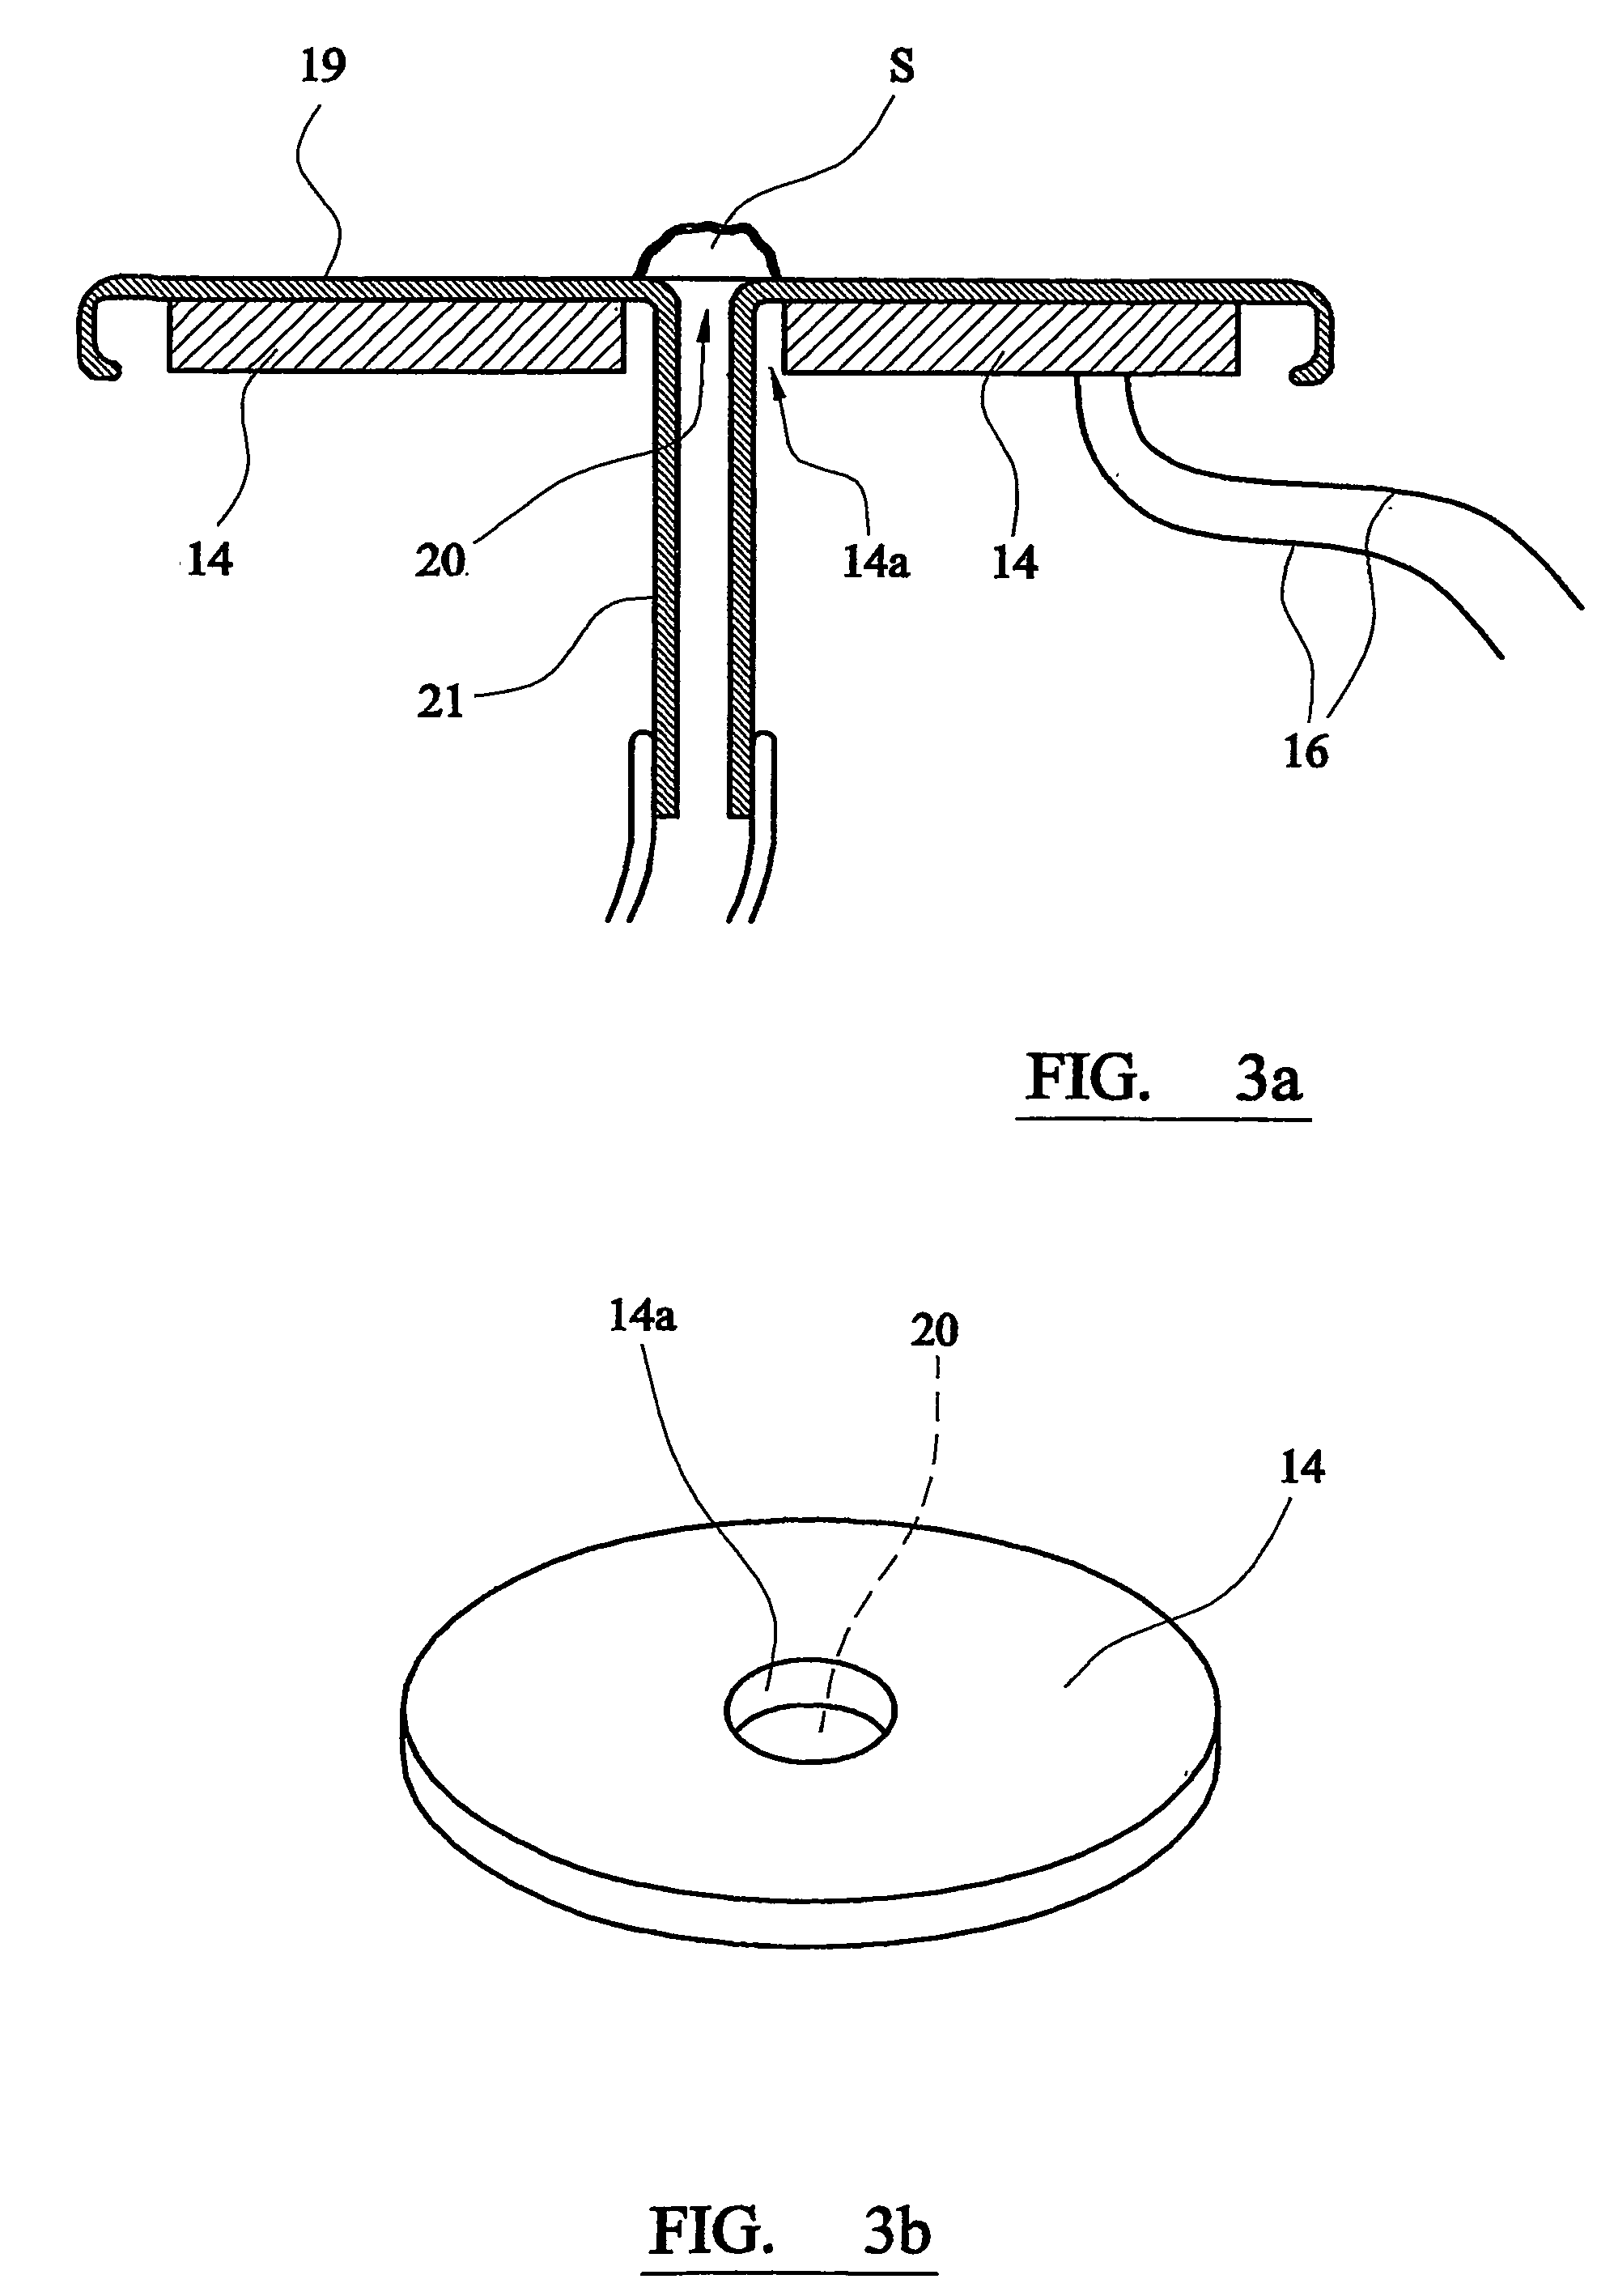 Apparatus for forming a head on a beverage